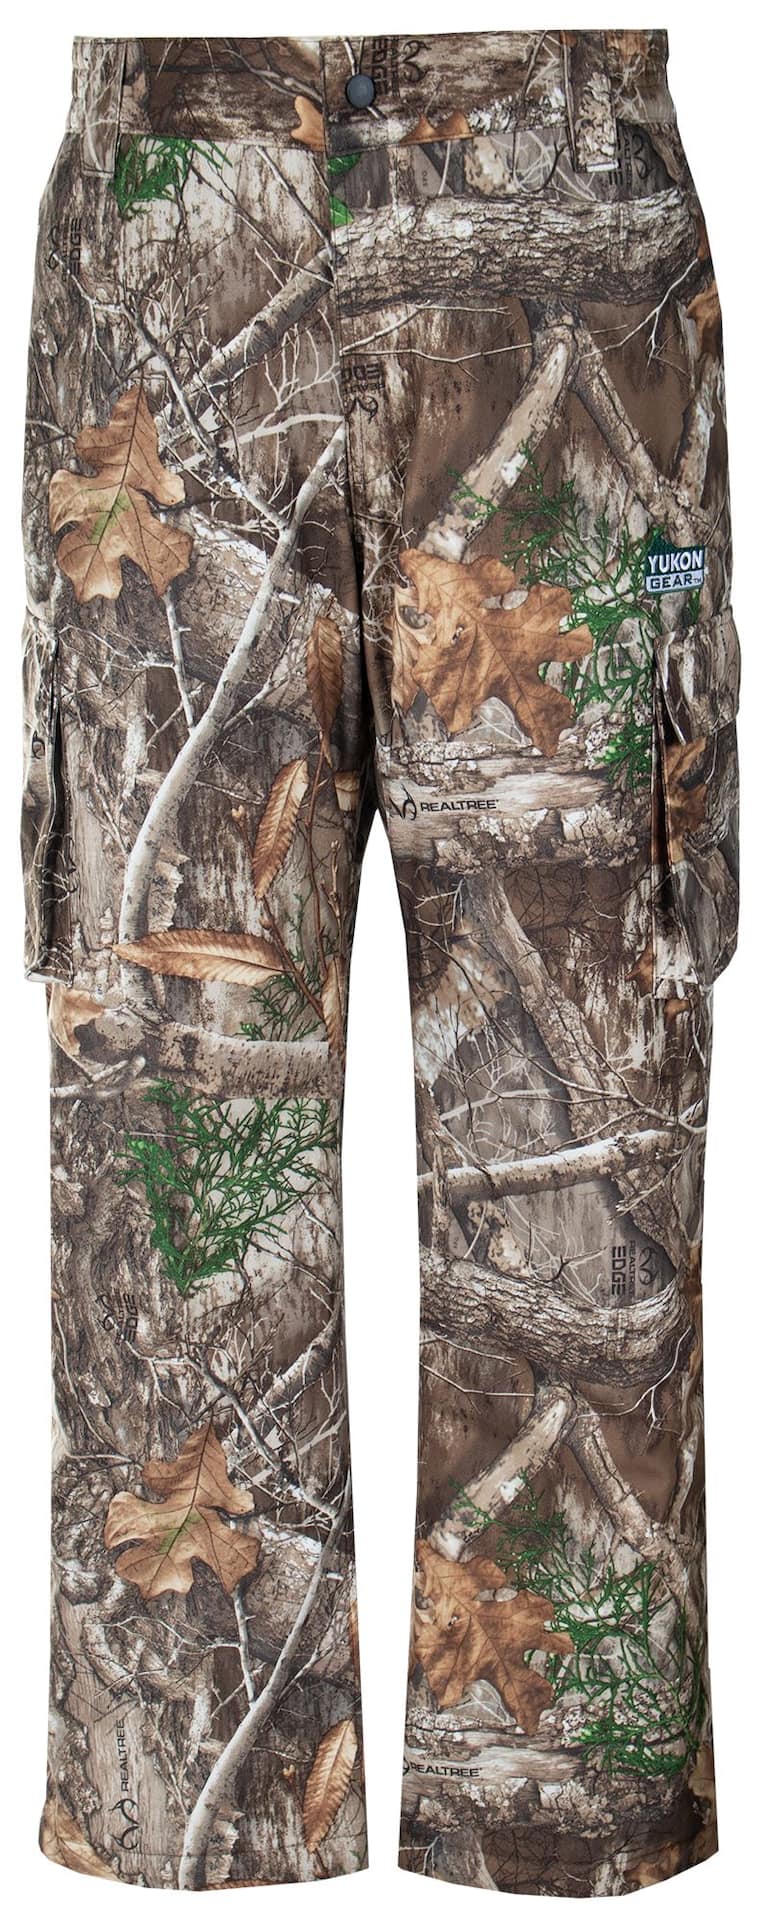 Yukon Gear Men's Insulated Water-Resistant Windproof Hunting Pants